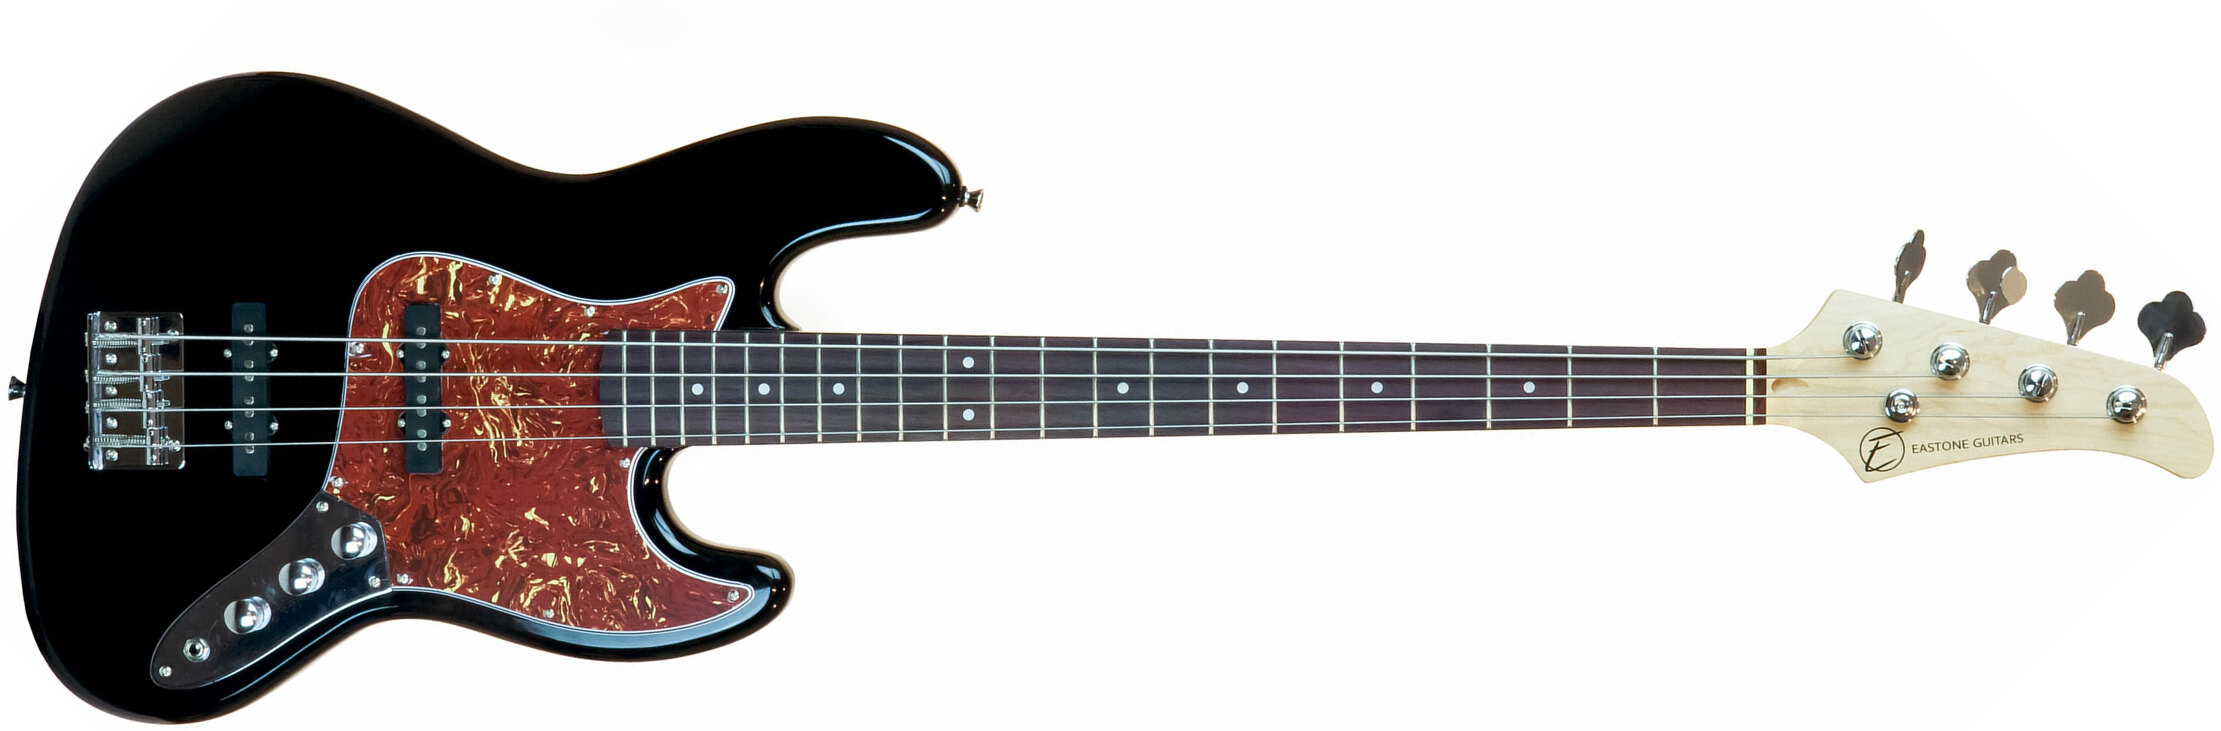 Eastone Jab Pur - Black - Solid body electric bass - Main picture